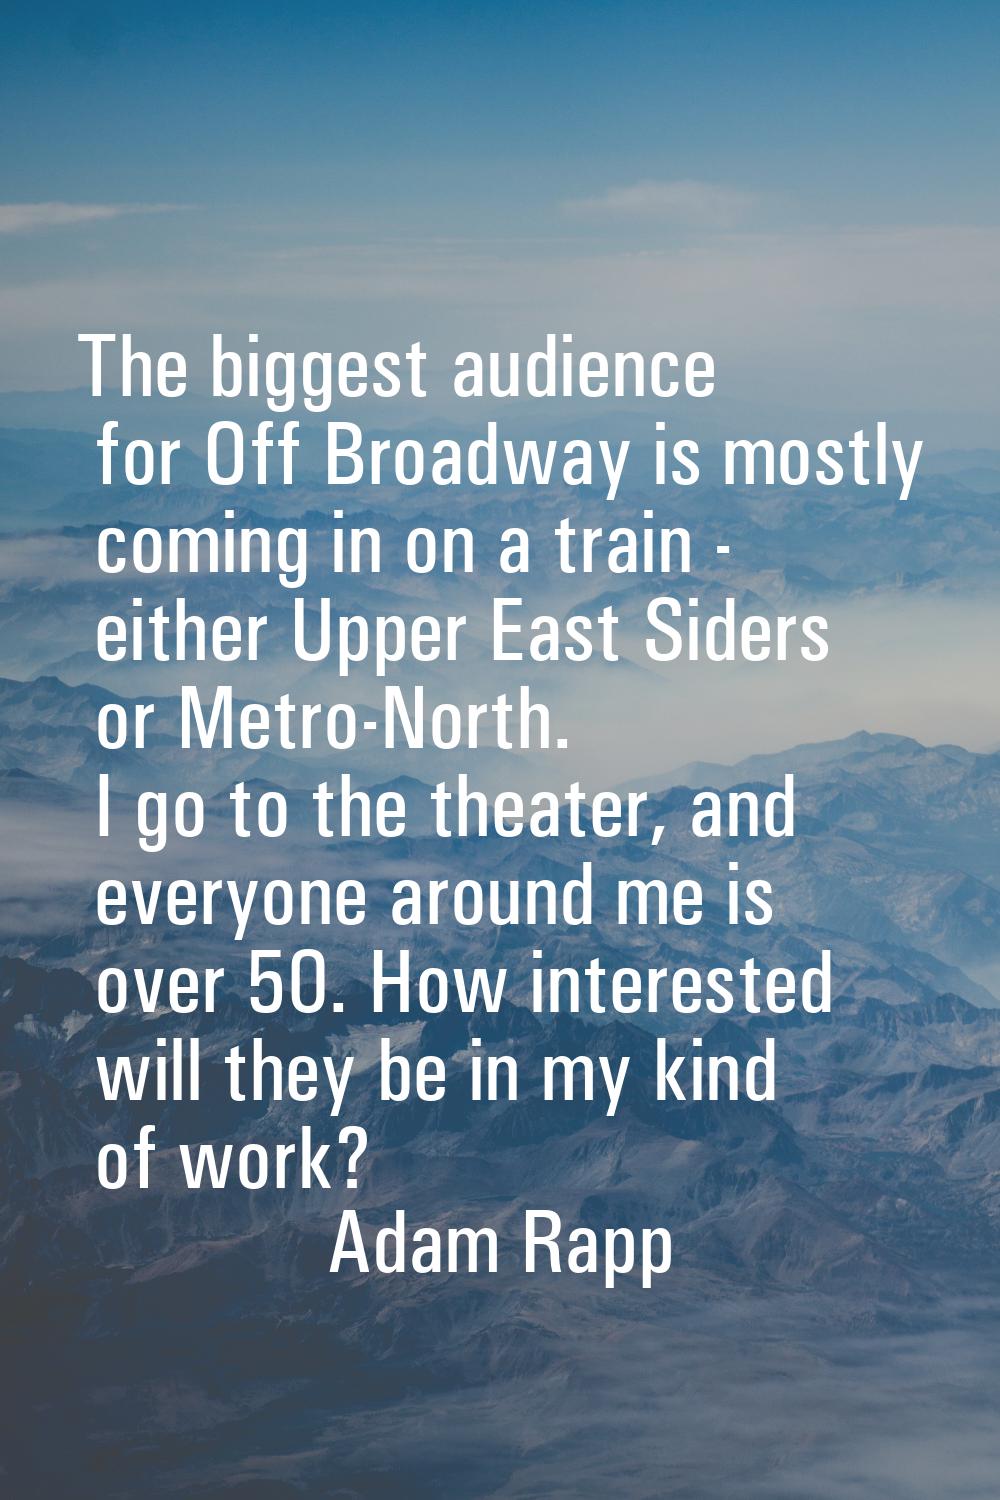 The biggest audience for Off Broadway is mostly coming in on a train - either Upper East Siders or 